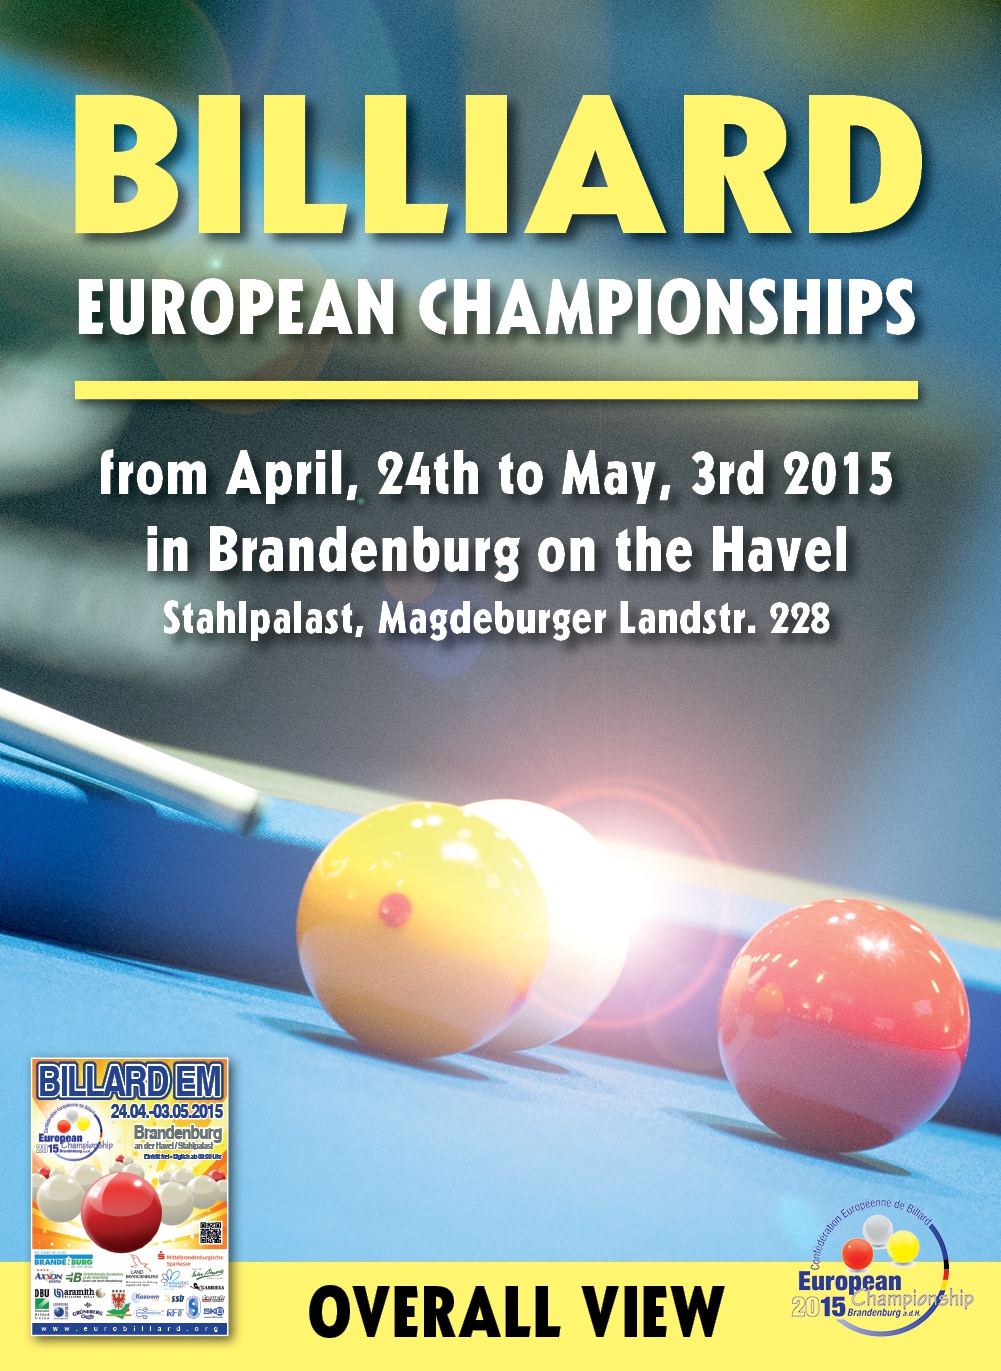 THE OVERALL VIEW OF THE CAROM-EC IN BRANDENBURG IS ONLINE!.